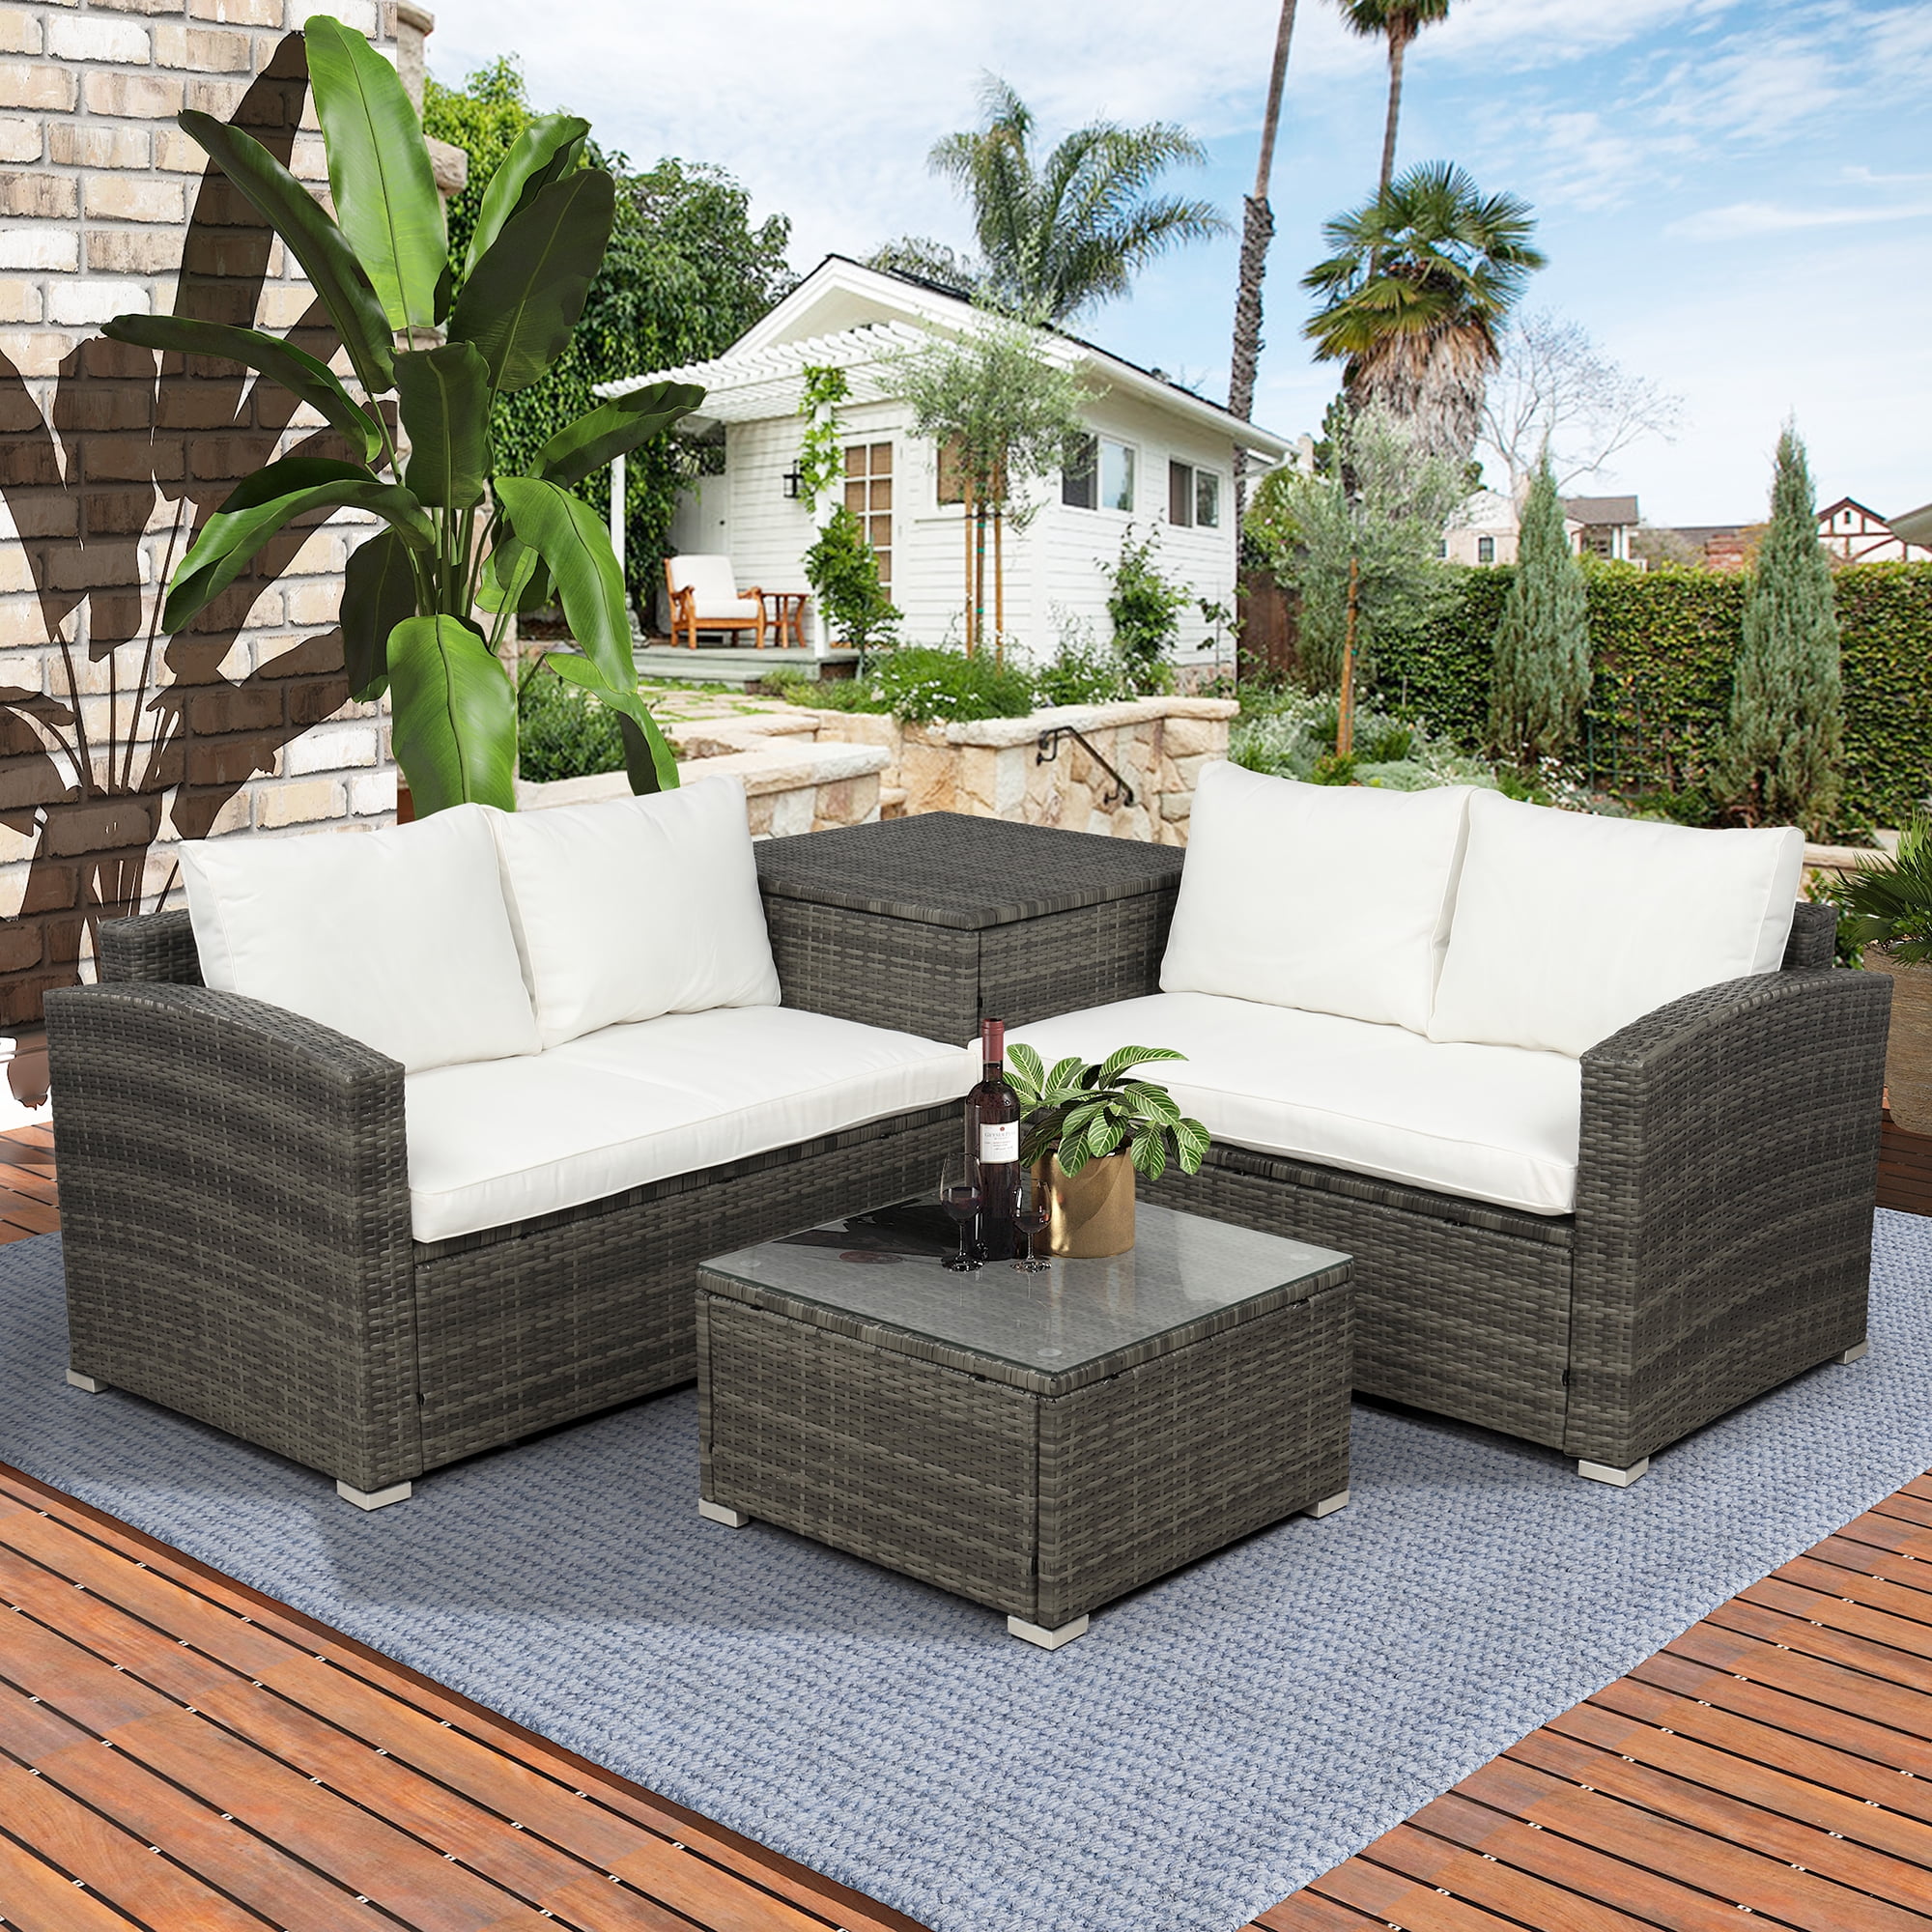 DORTALA 4-Piece Patio Wicker Conversation Furniture Set Wicker Chairs with Soft Cushion and Table with Tempered Glass Bistro Sets with Coffee Table for Courtyard Balcony Garden Outdoor Rattan Sofas with Tempered Glass Coffee Table Black